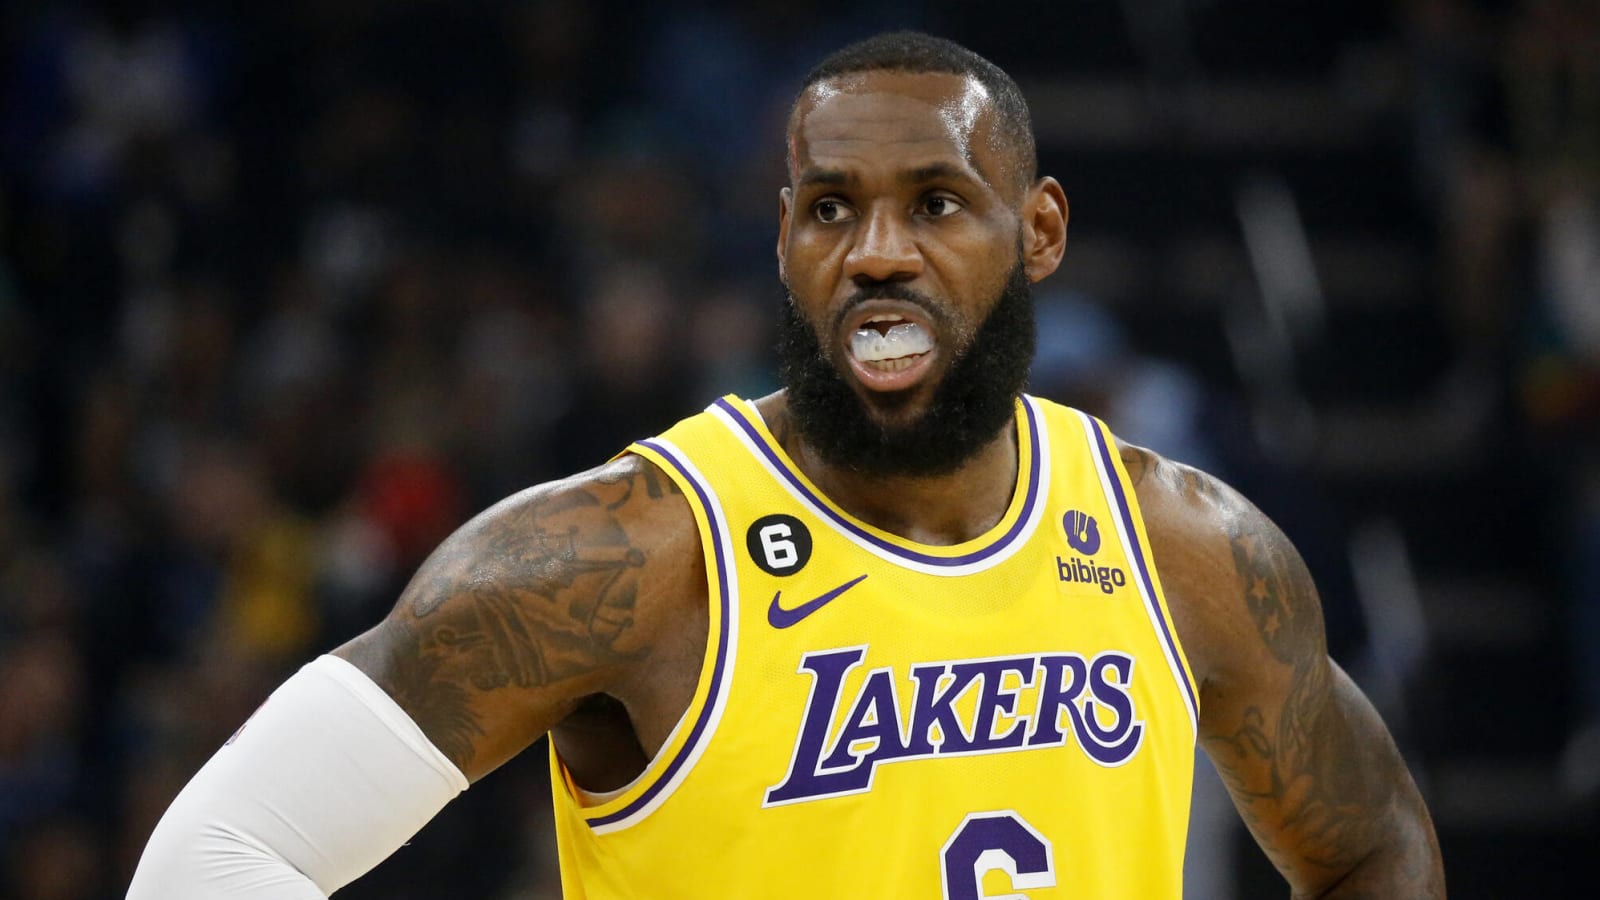 LeBron James reacts to son Bronny’s college decision